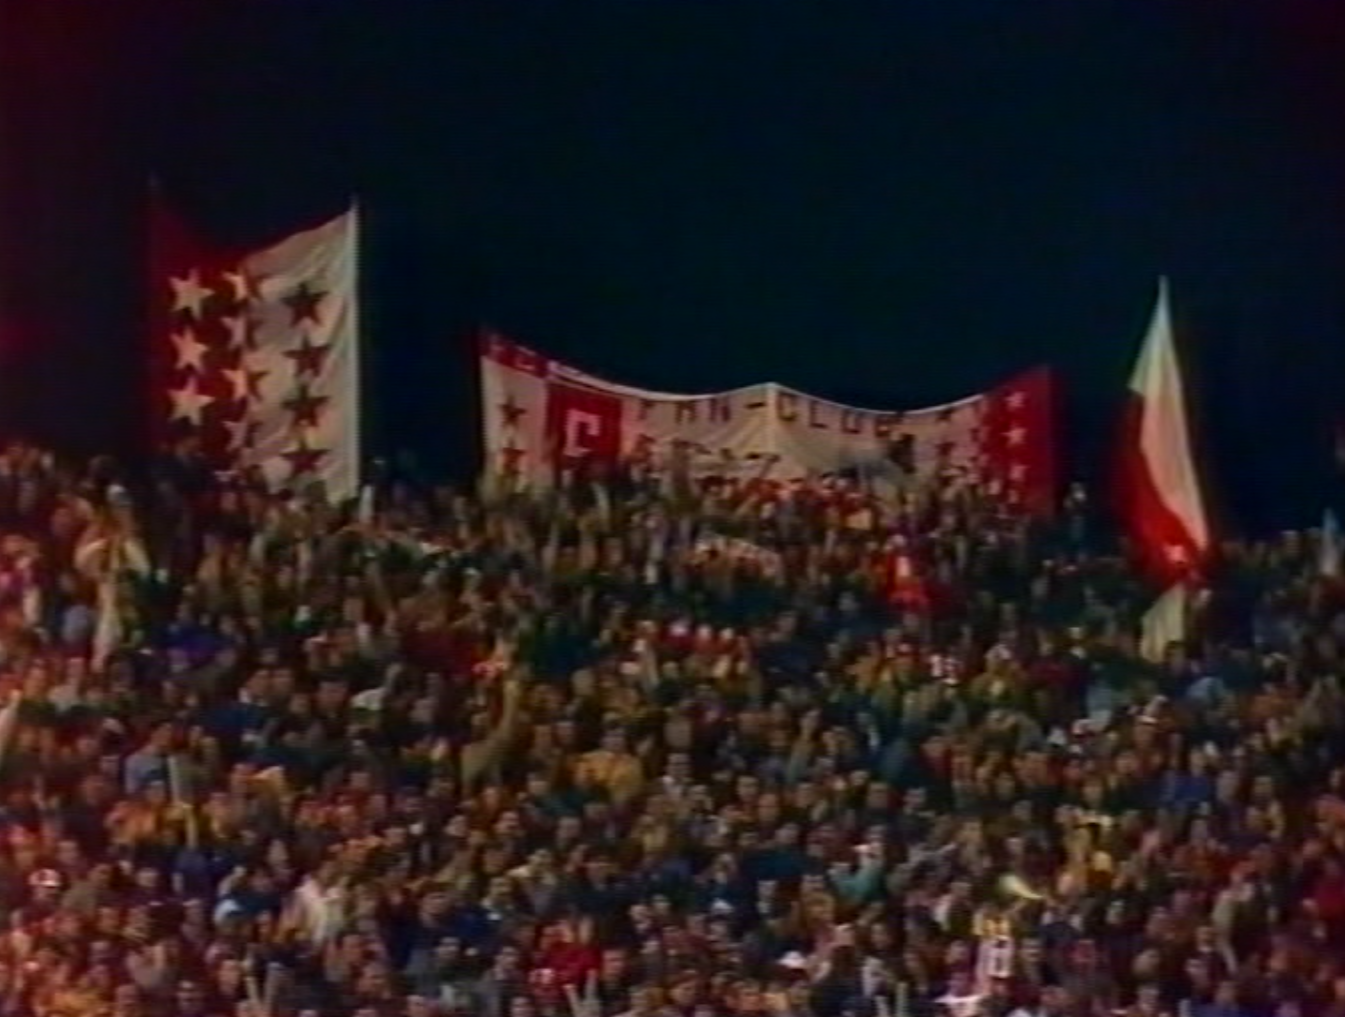 FC Sion - GKS Katowice 3:0 (05.11.1986)